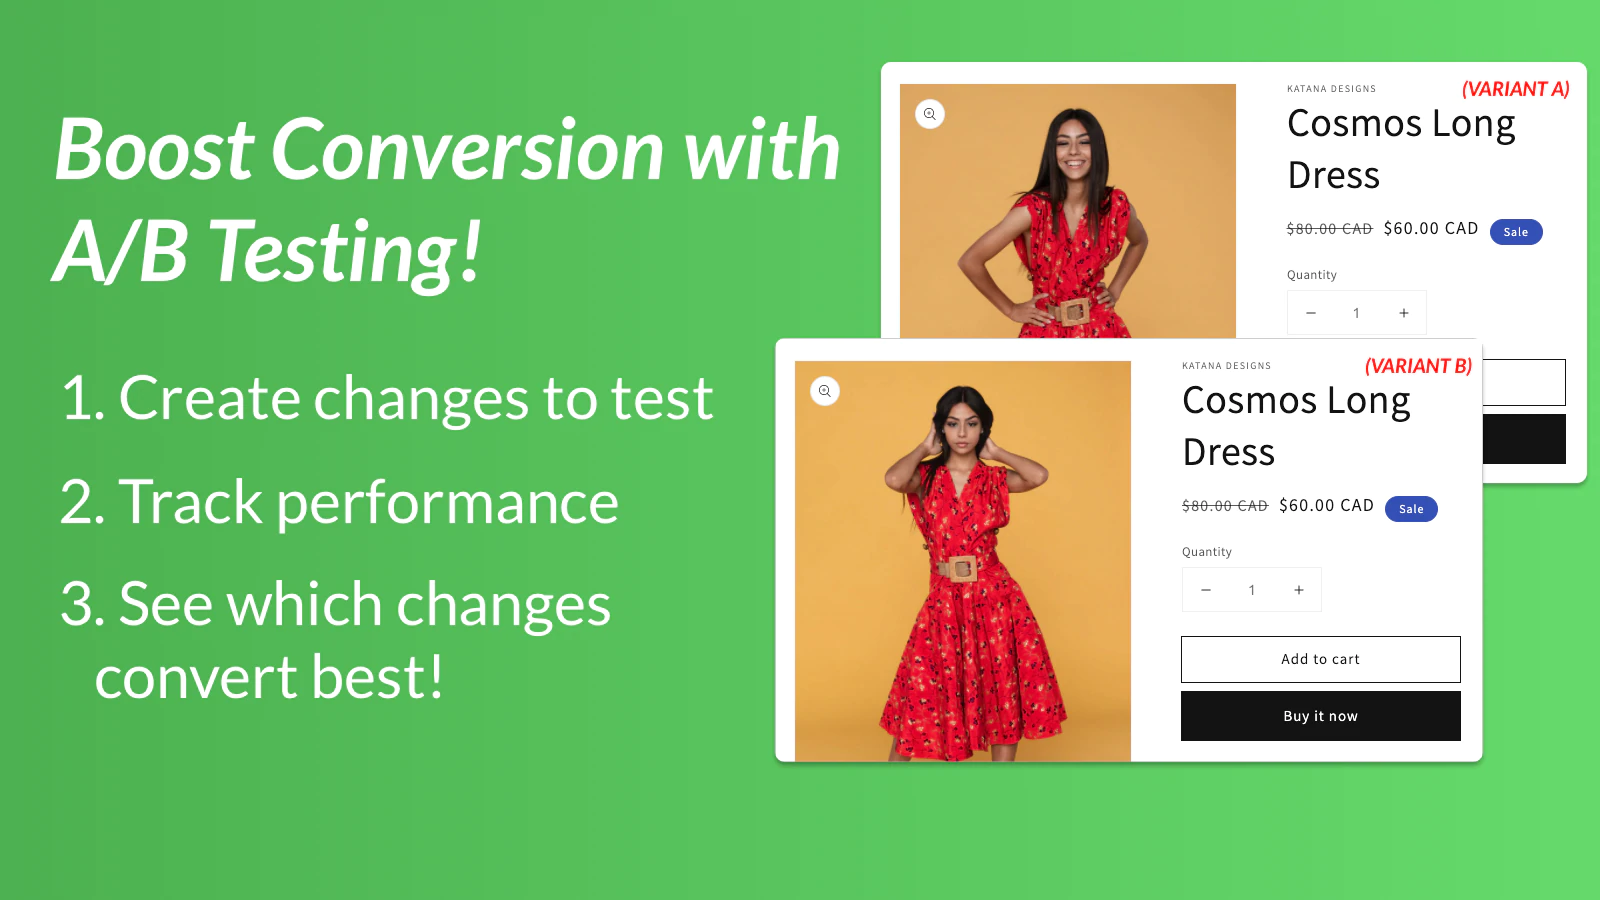 Try the Product + Upsell A/B Testing app for free!